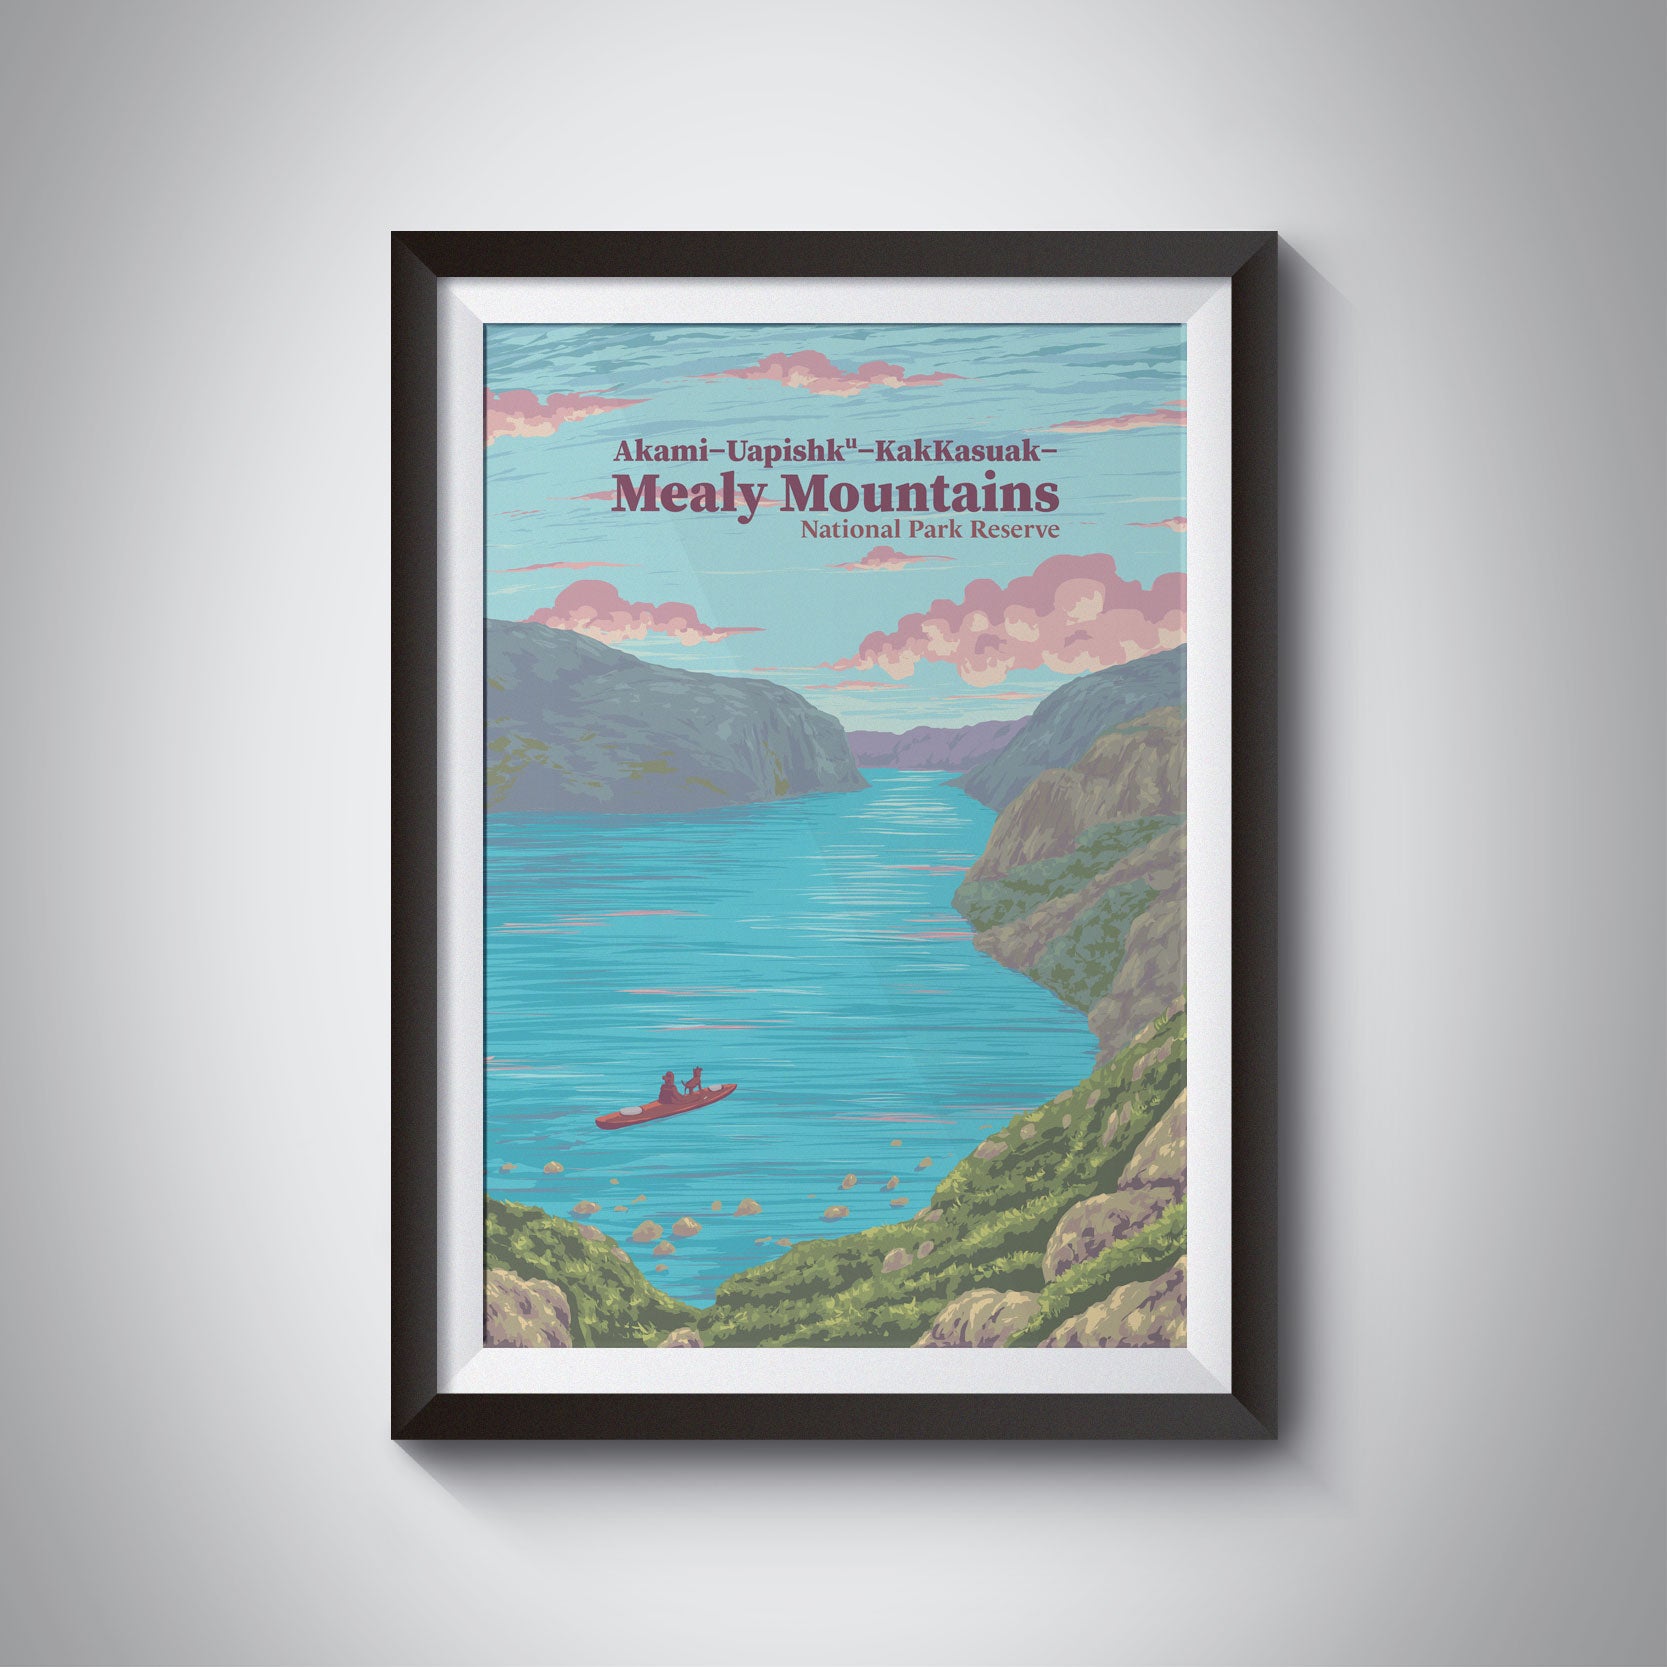 Mealy Mountains National Park Reserve Canada Travel Poster